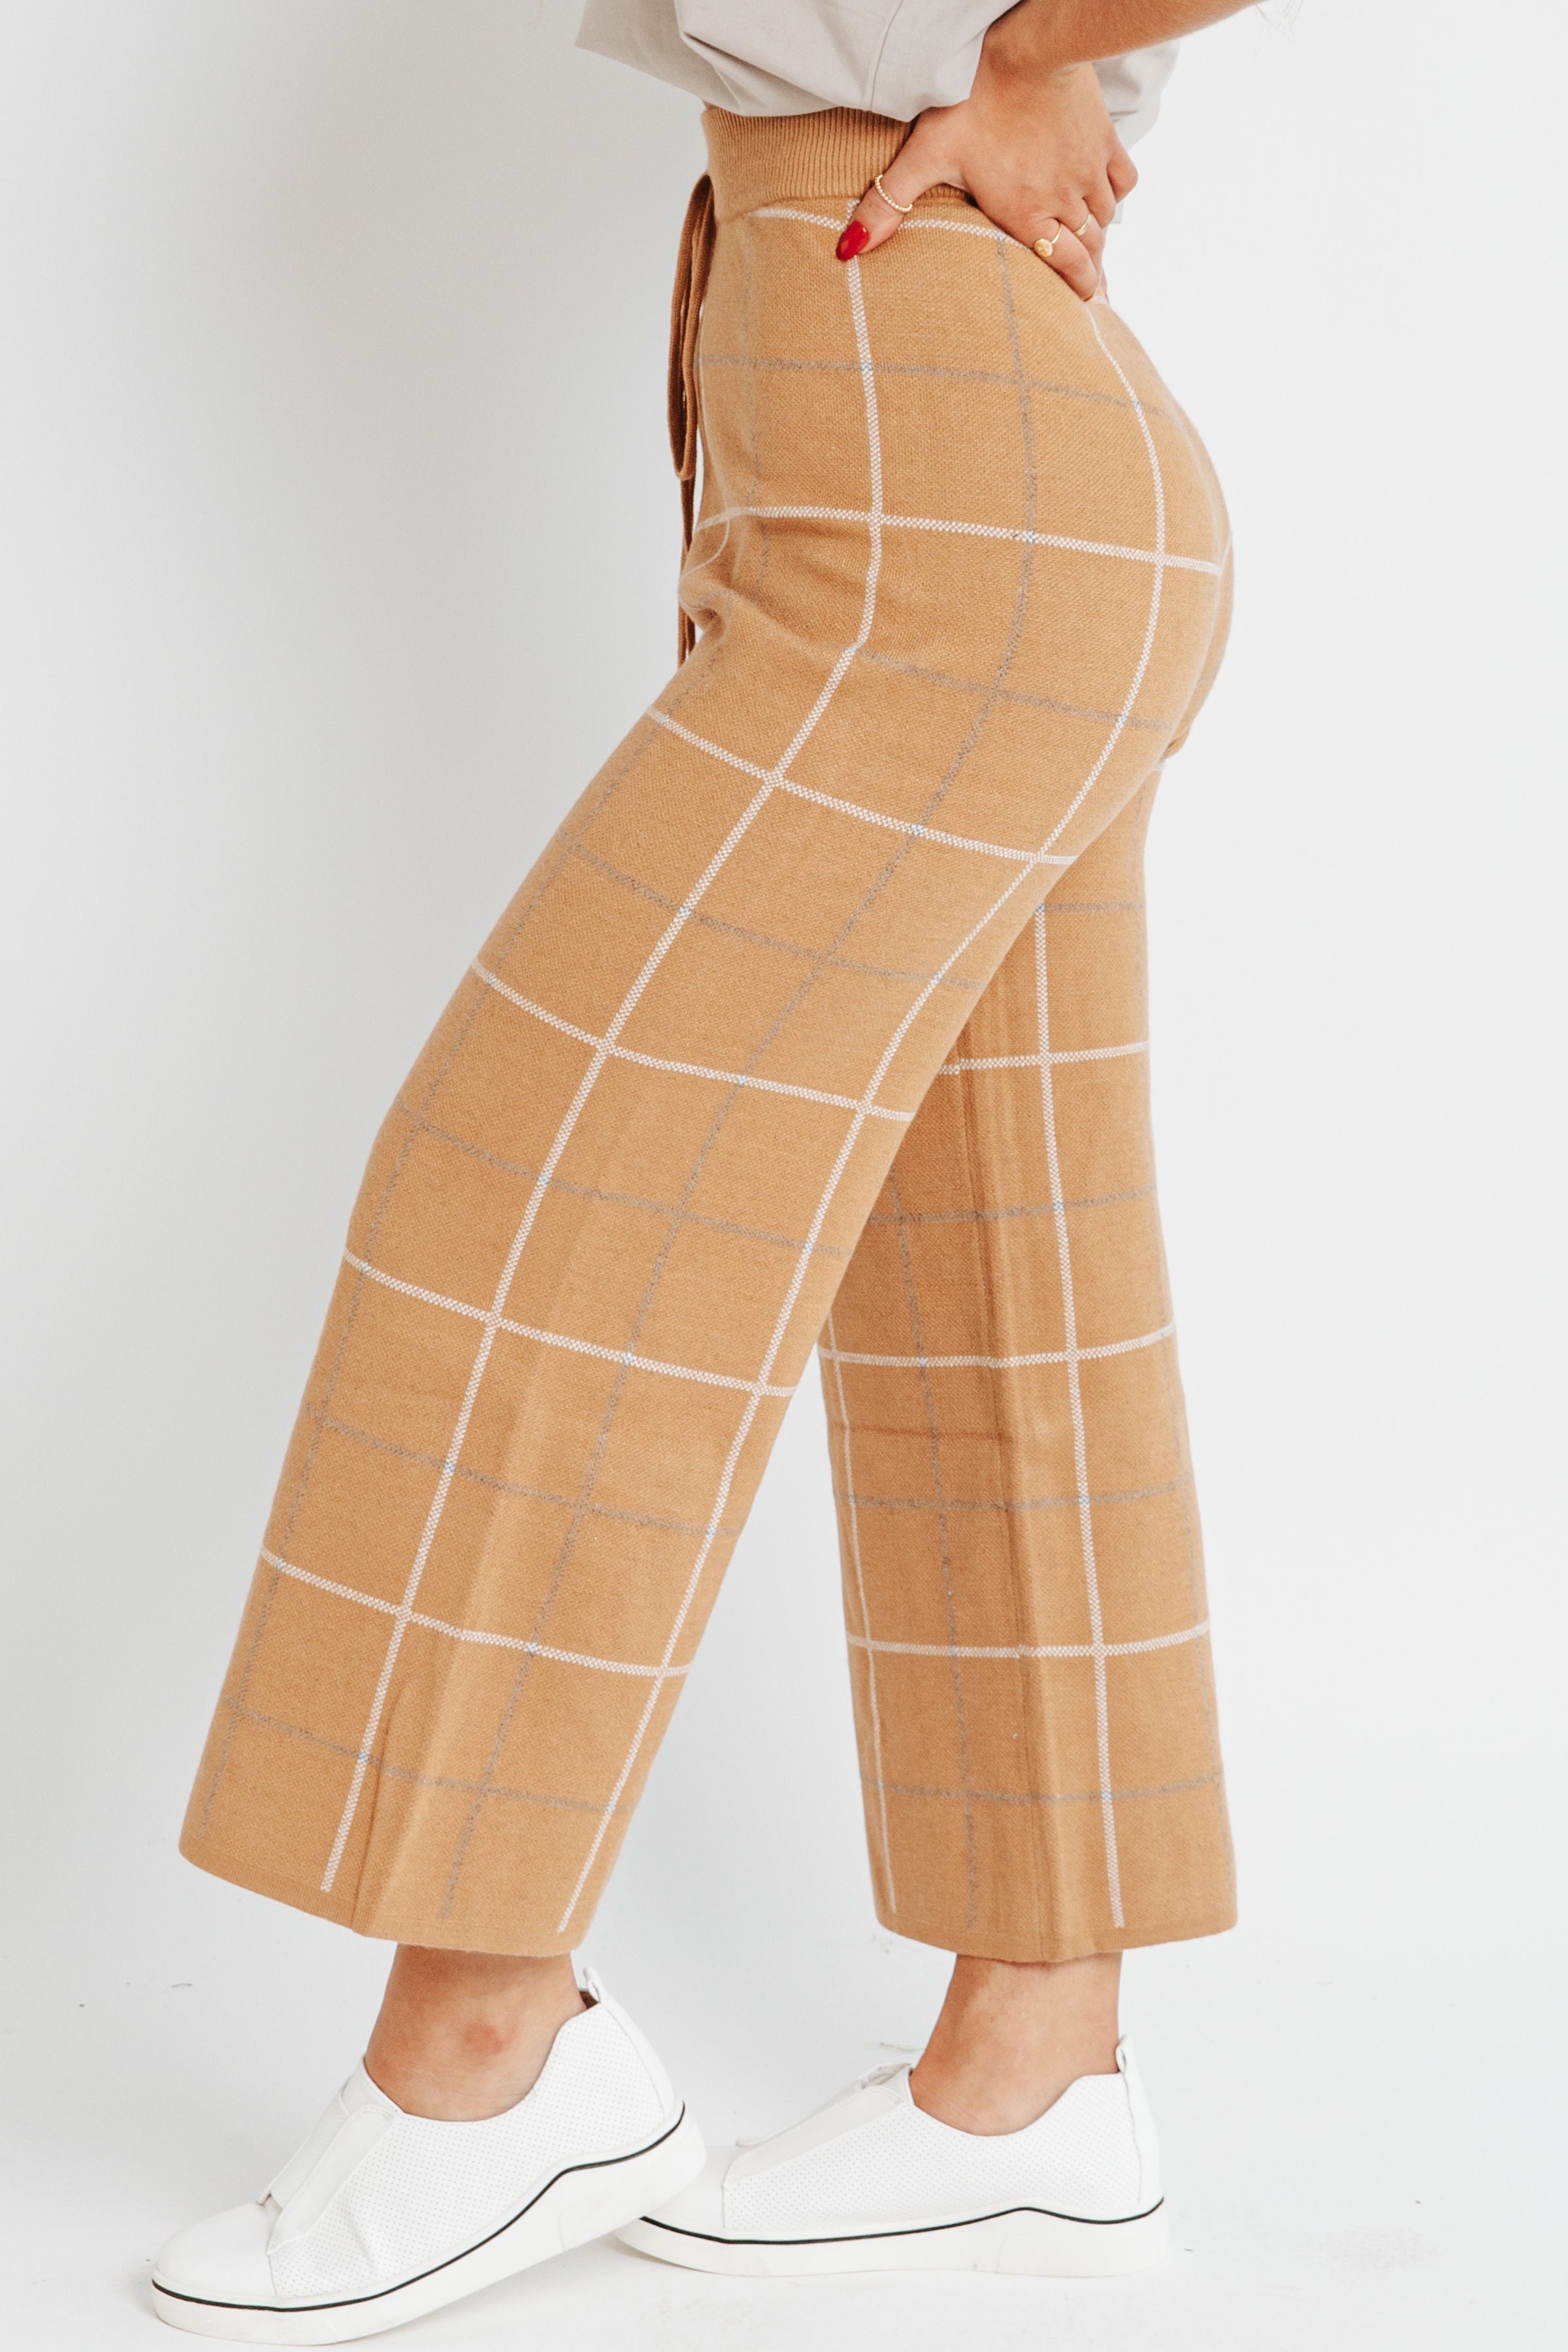 The Josh Plaid Sweater Pant in Camel